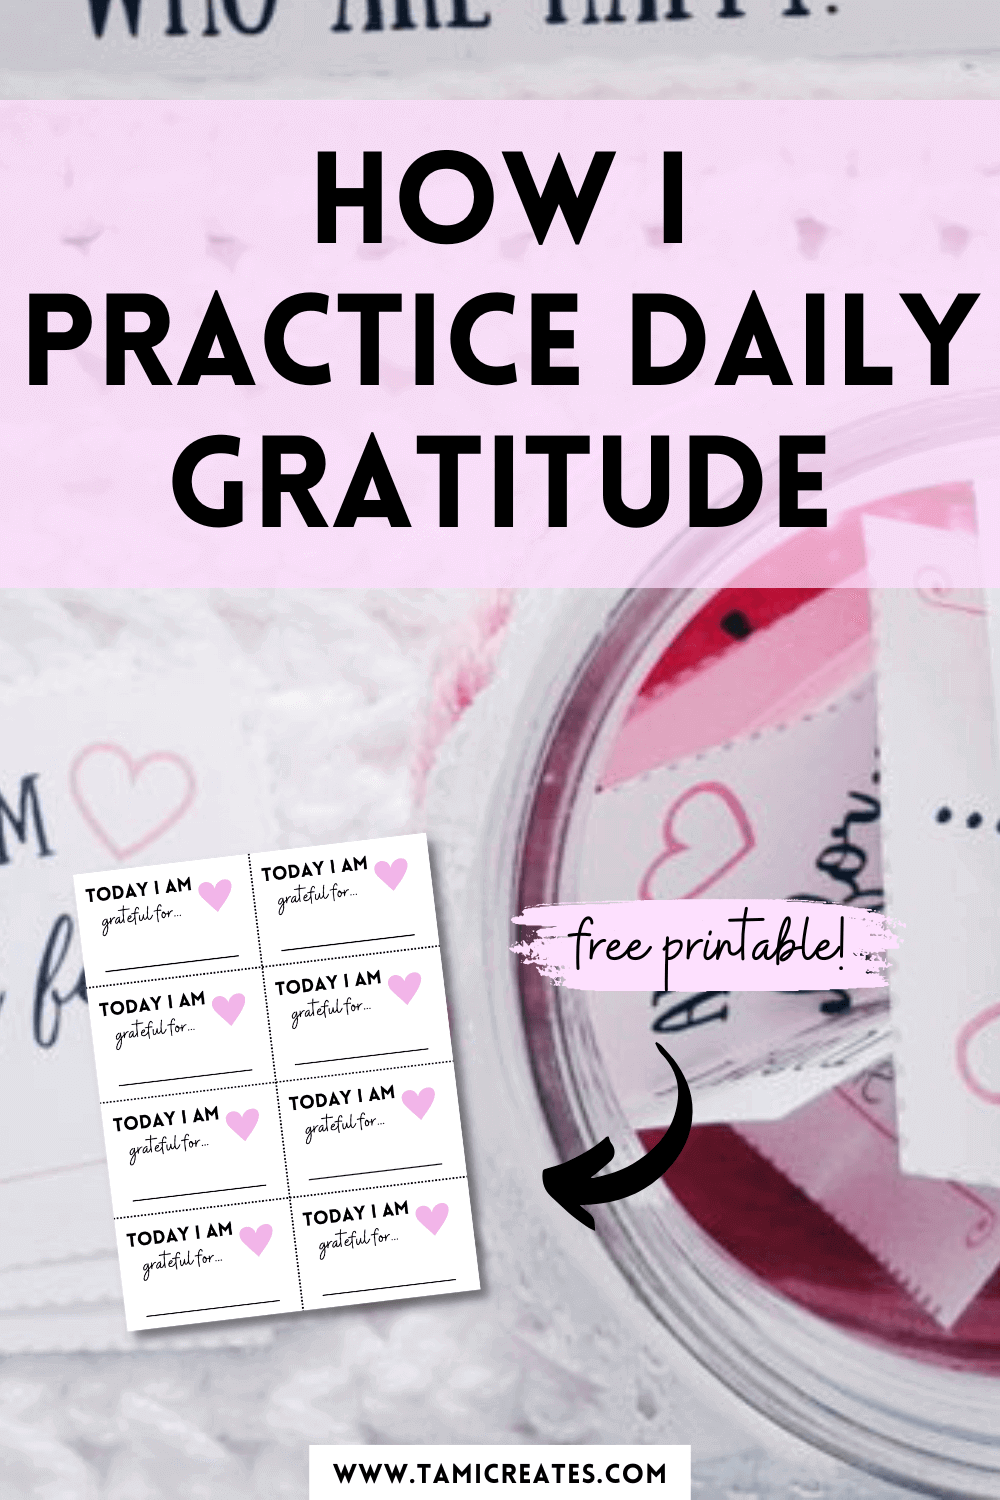 Gratitude is such a simple concept but it can transform your life. Here's how I practice daily gratitude with a gratitude jar - plus a free printable!